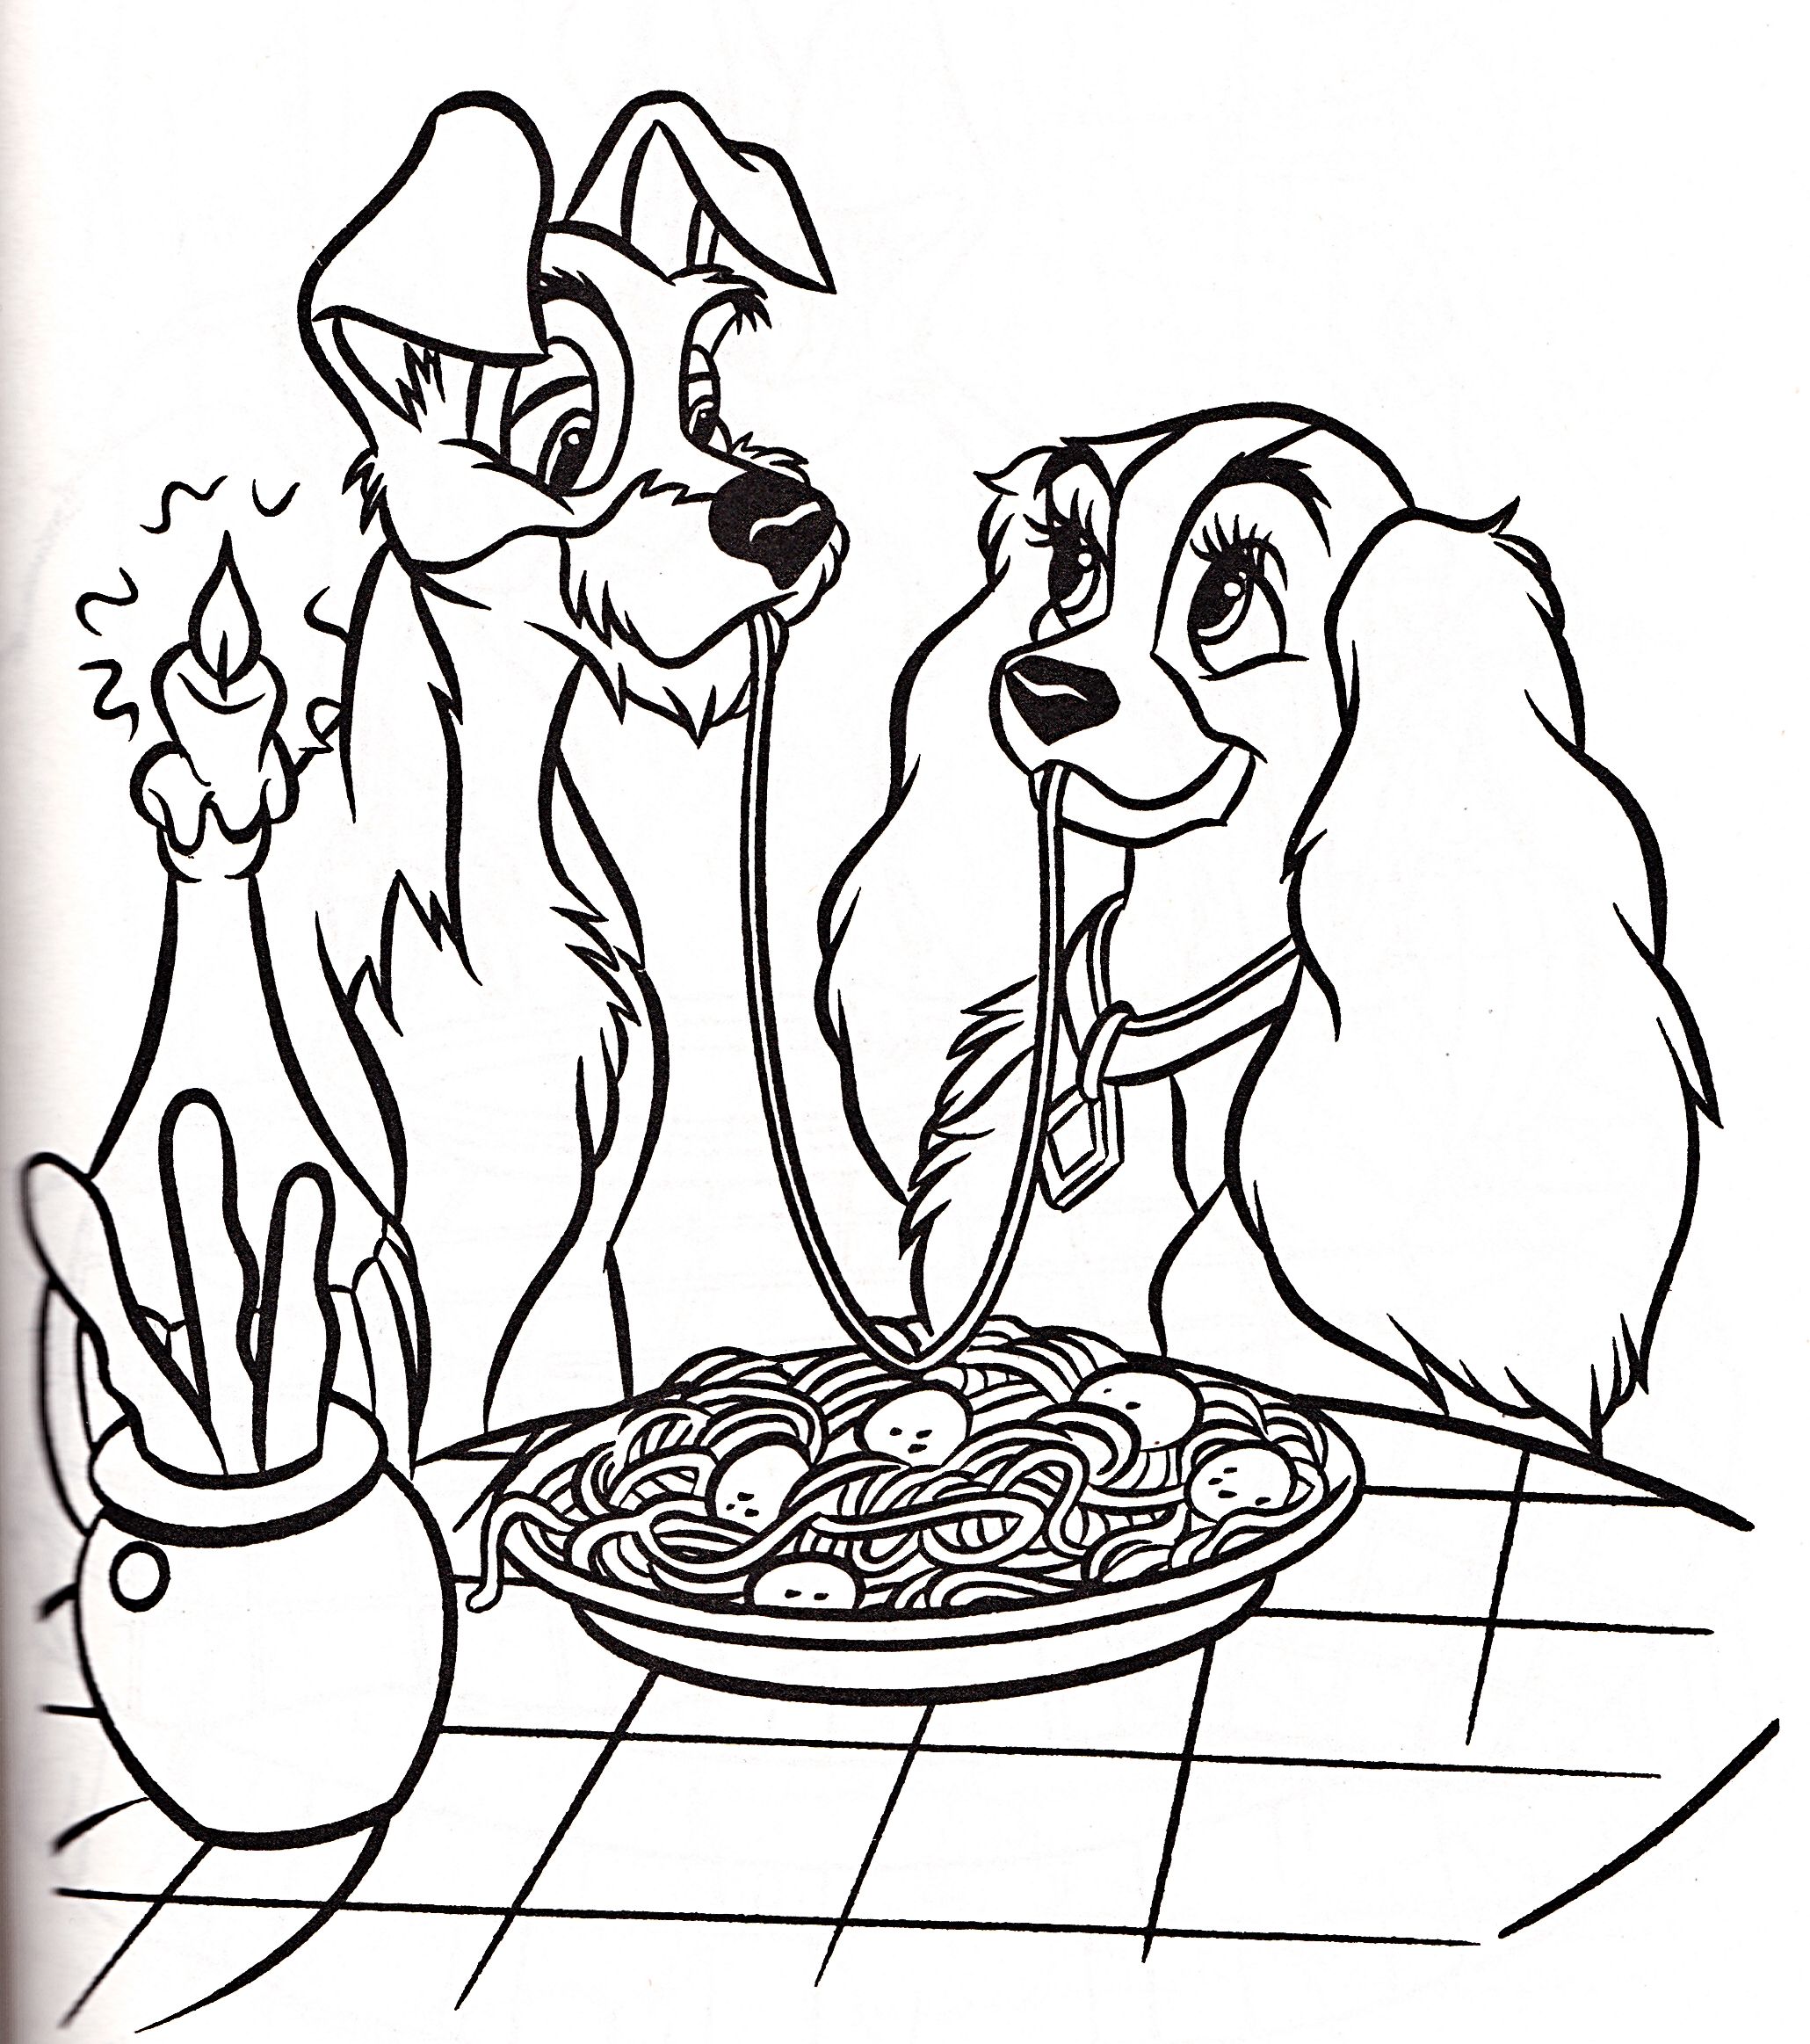 Walt Disney Coloring Pages - The Tramp & Lady - Walt ...